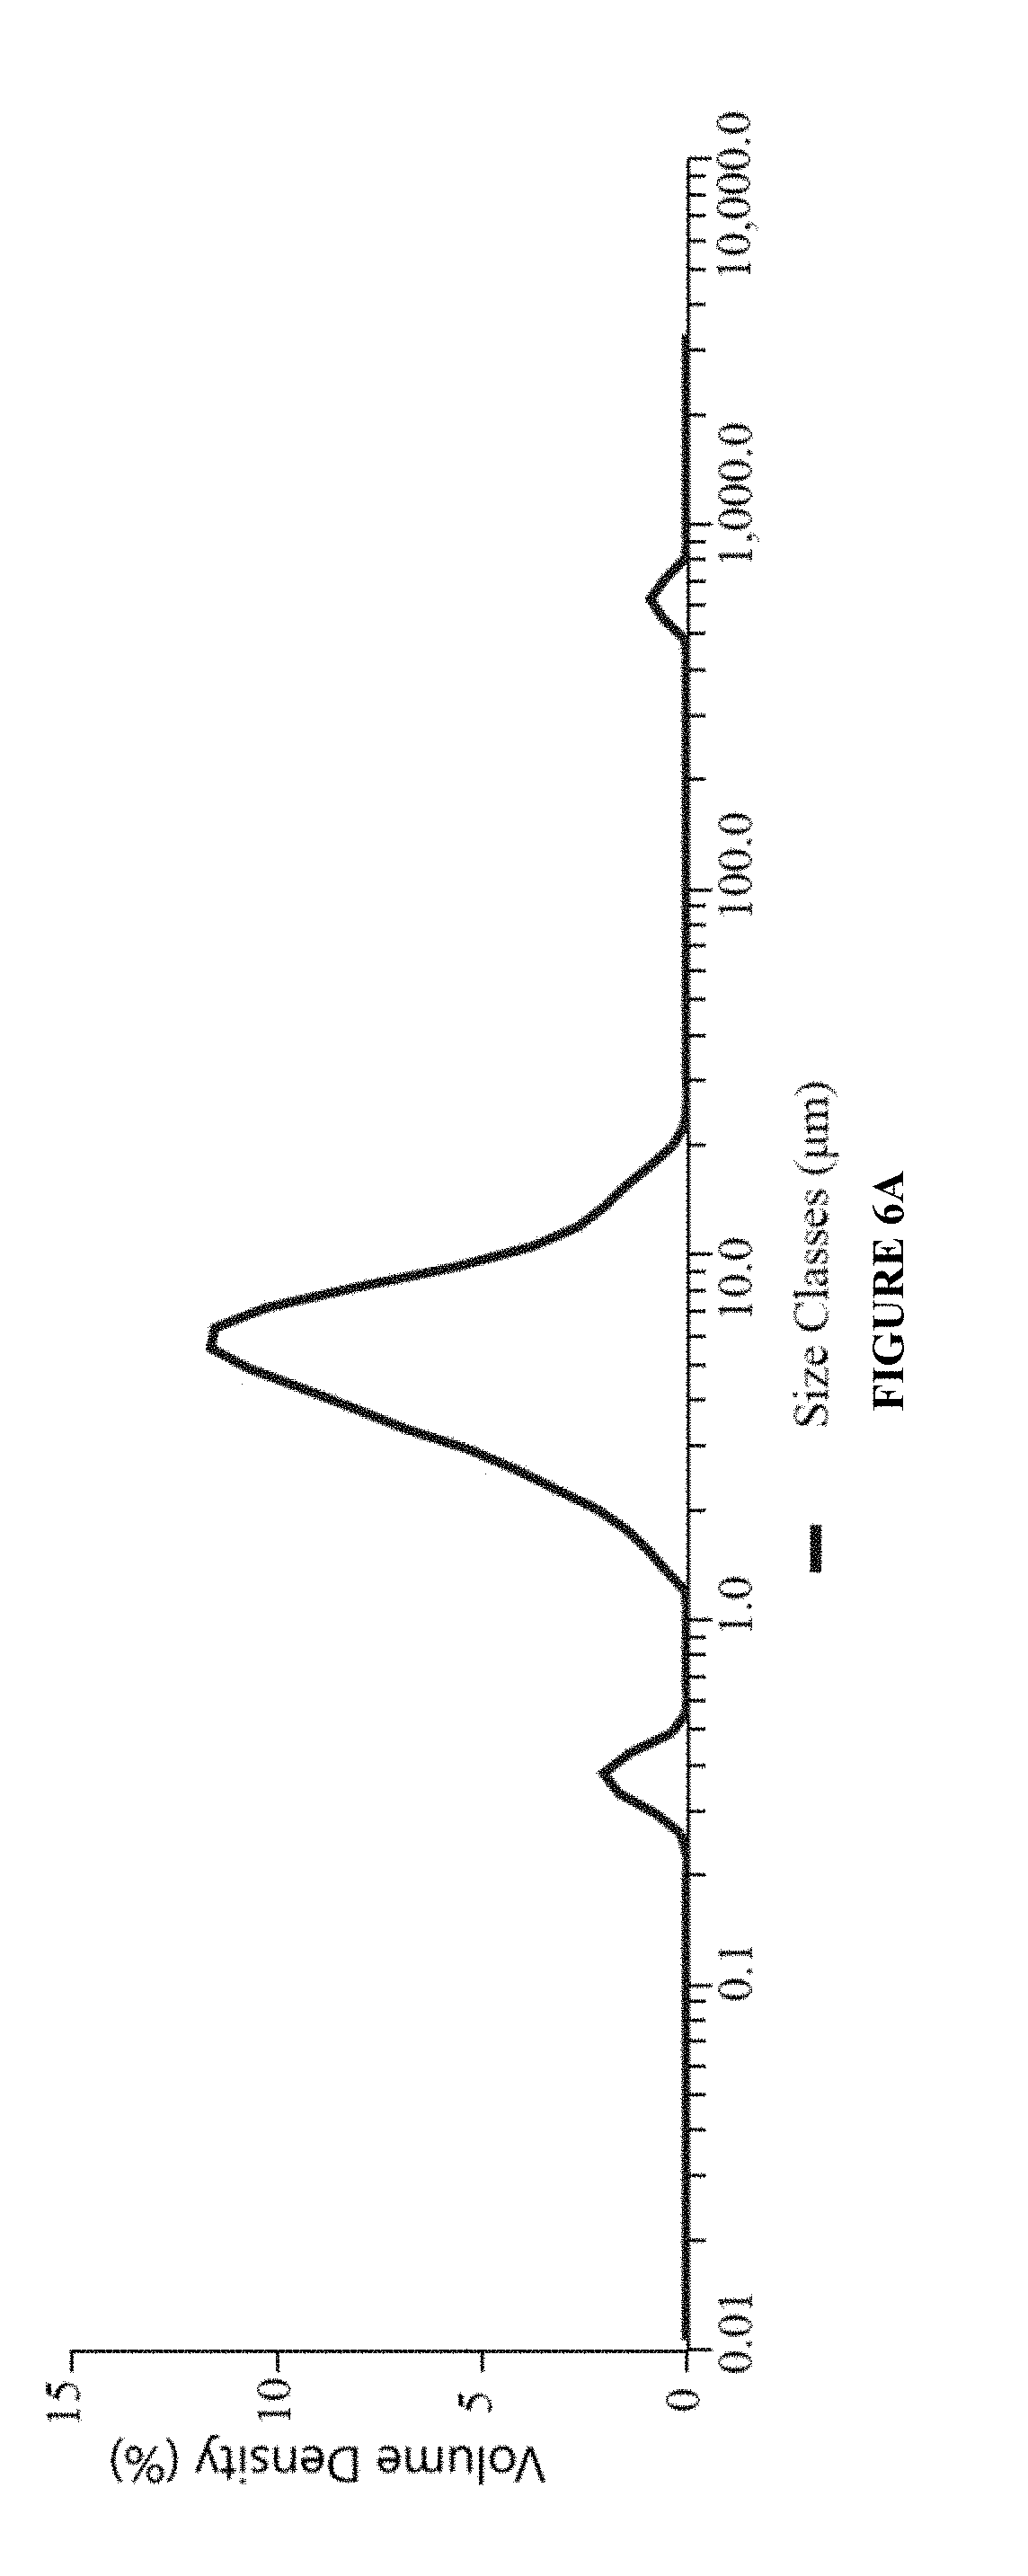 Ophthalmic compositions and methods of use